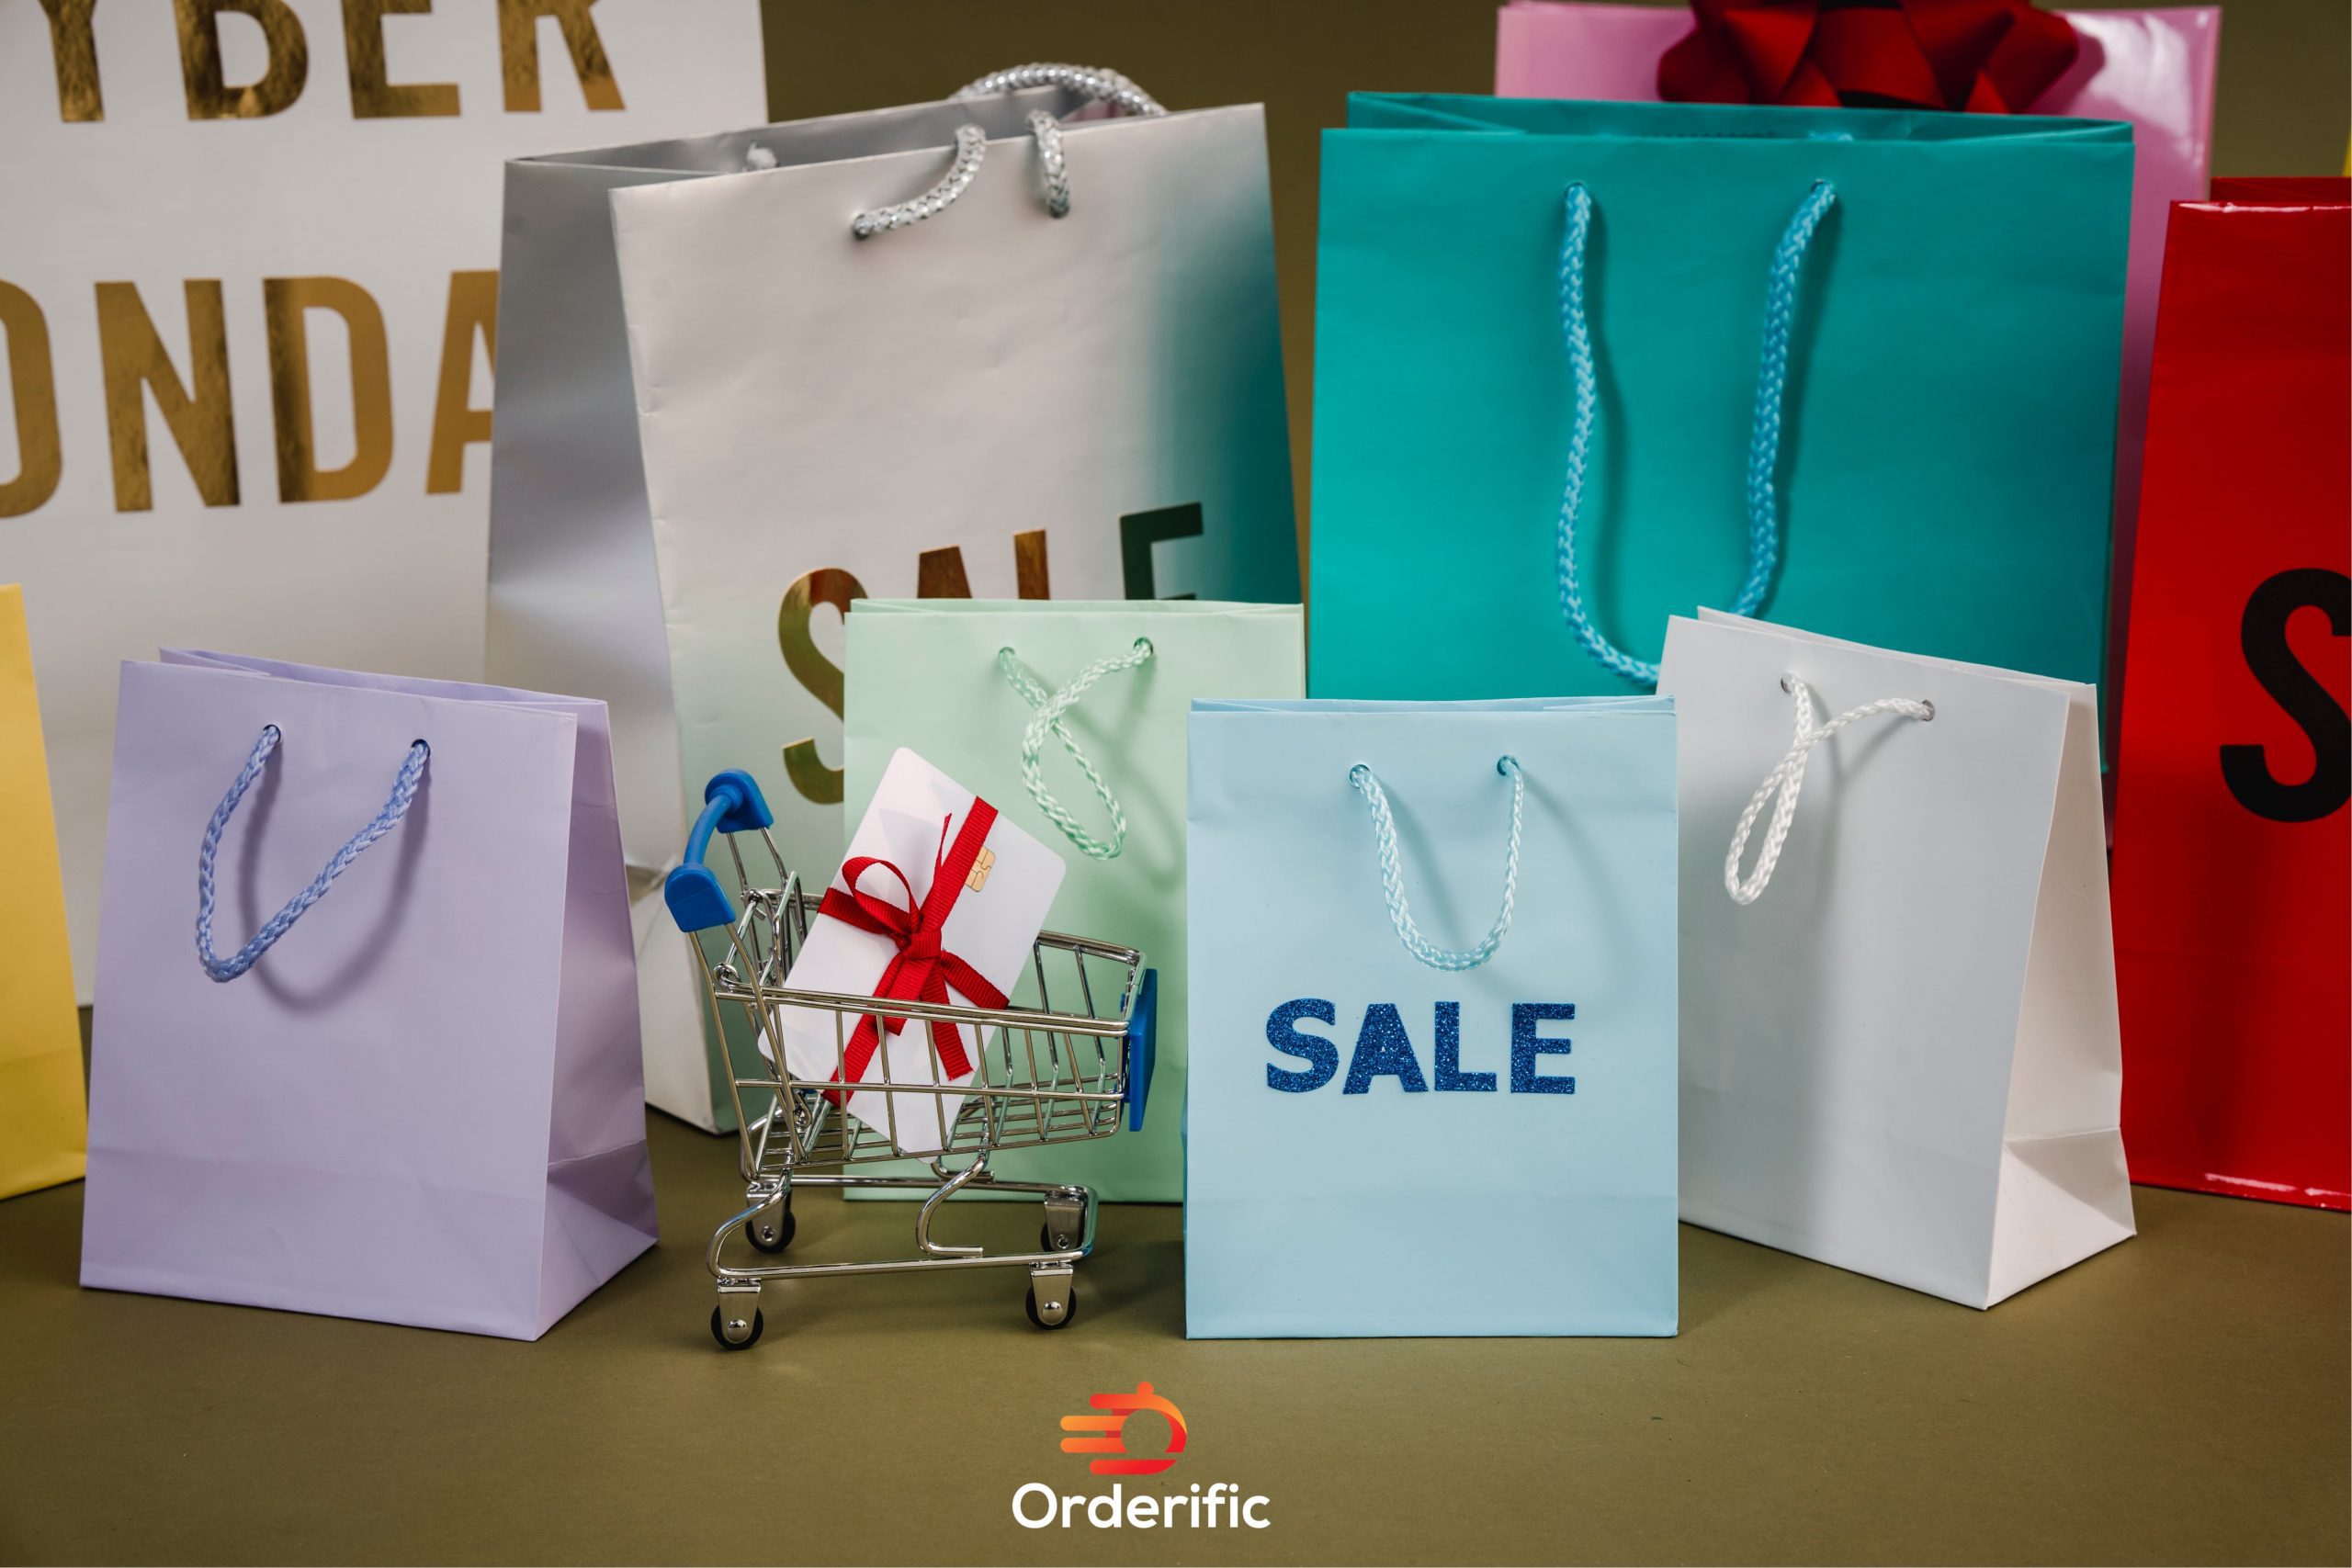 gift cards used during sale season for shopping